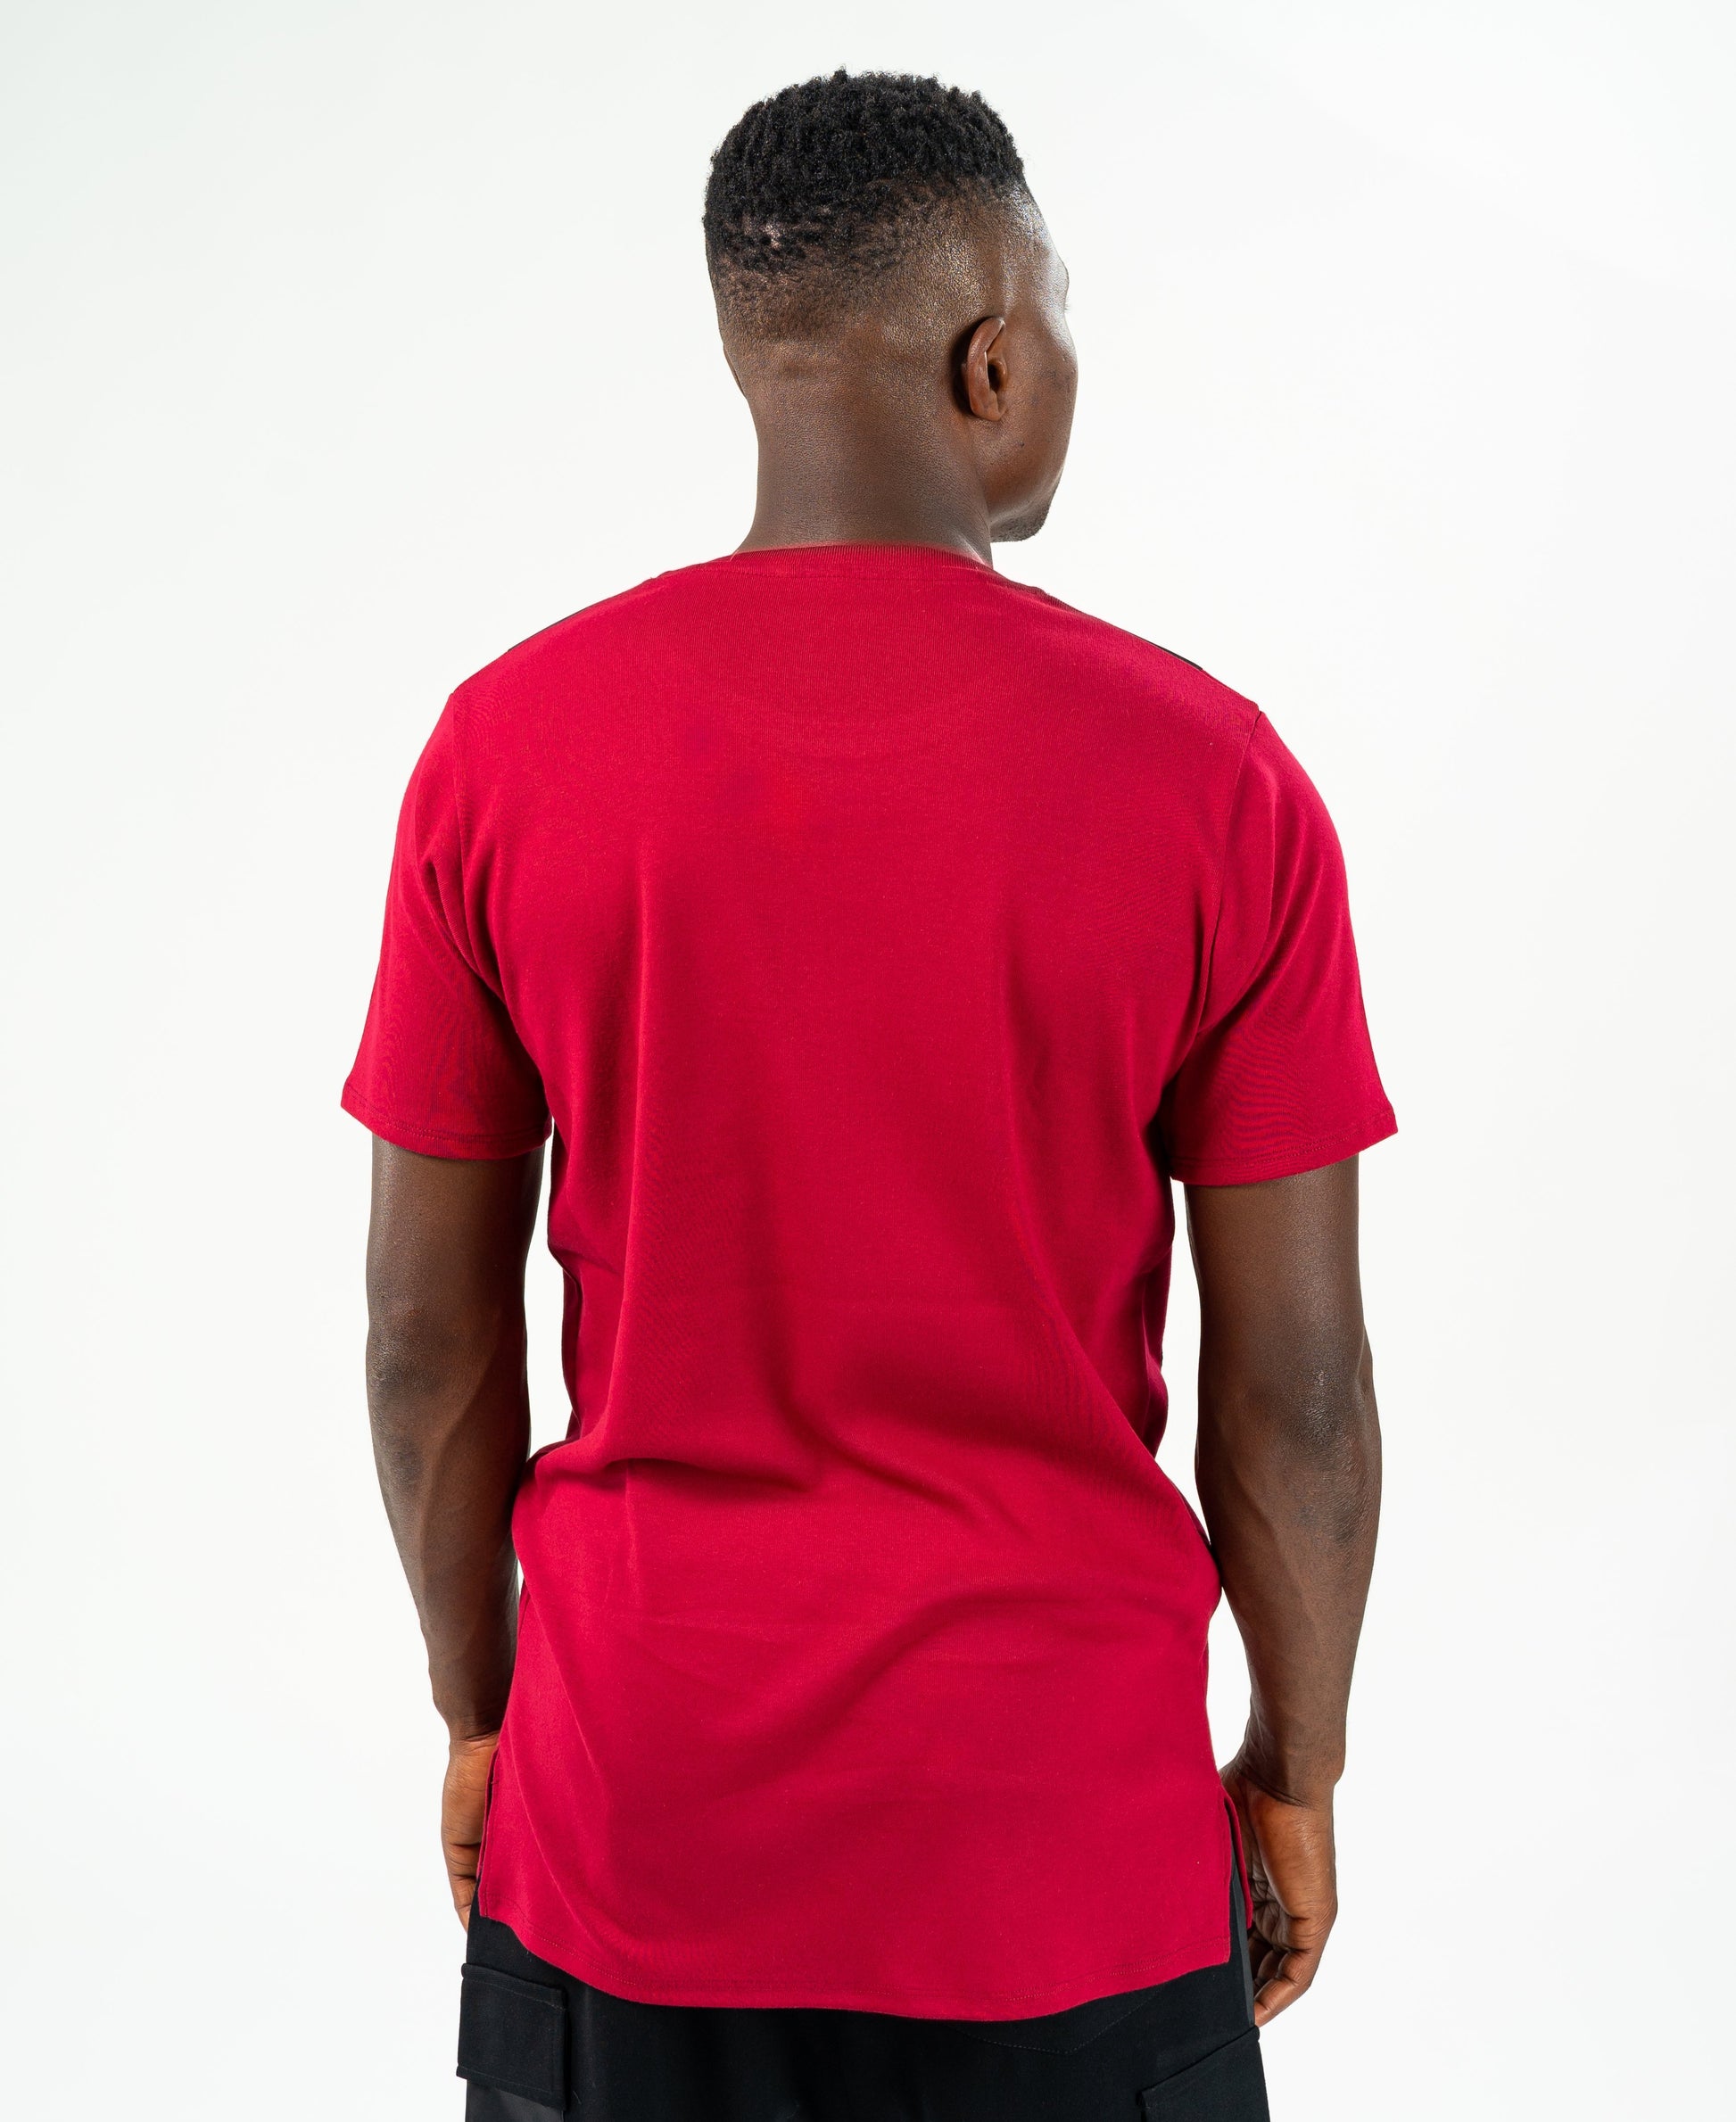 Burgundy t-shirt with bulletproof design - Fatai Style